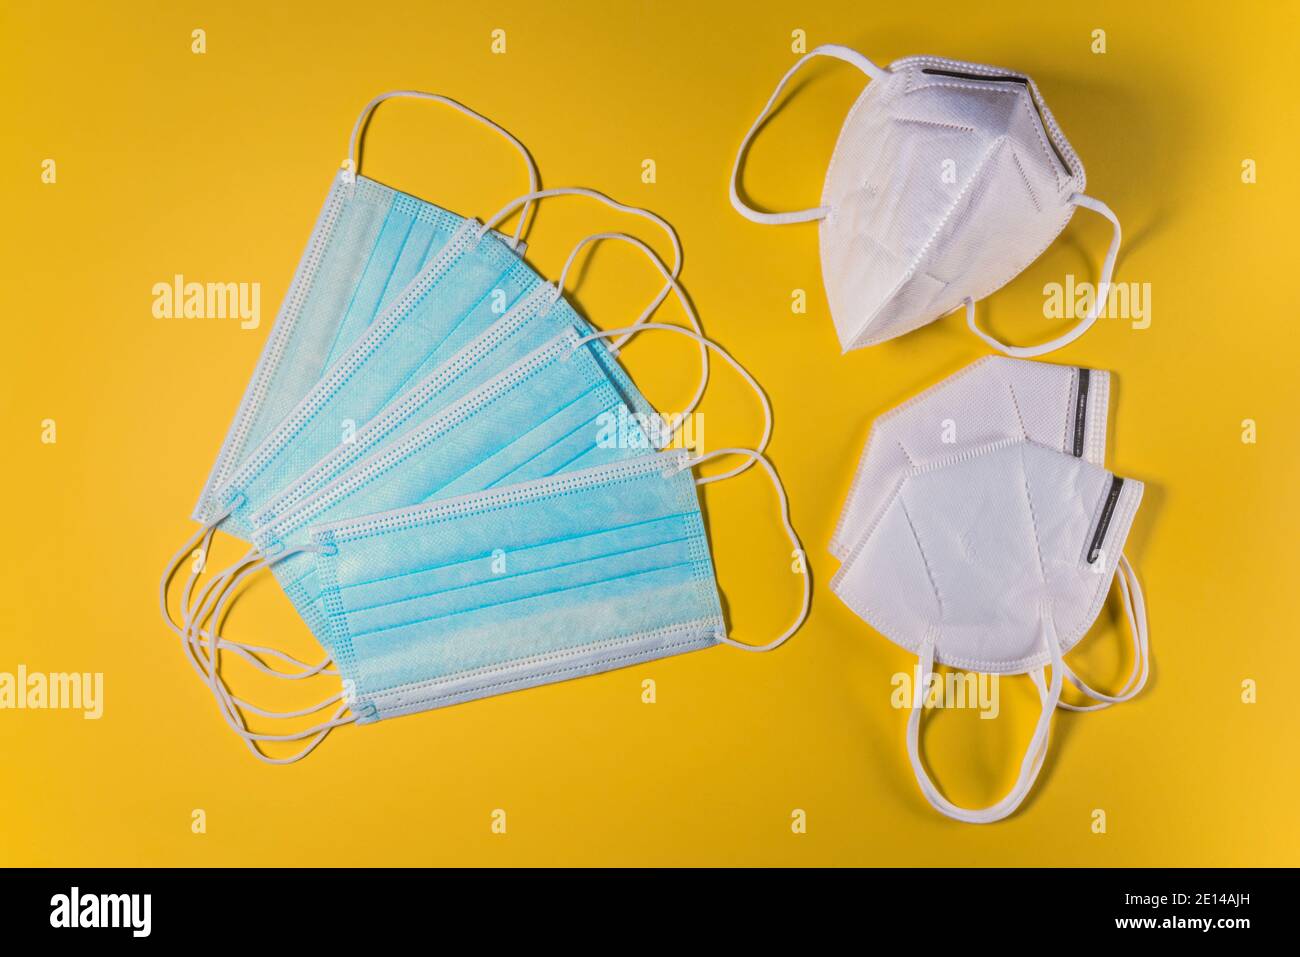 KN95 or FFP2 mask and surgical face mask on yellow background. Medical mask for Covid-19 protection to prevent coronavirus pandemic Stock Photo